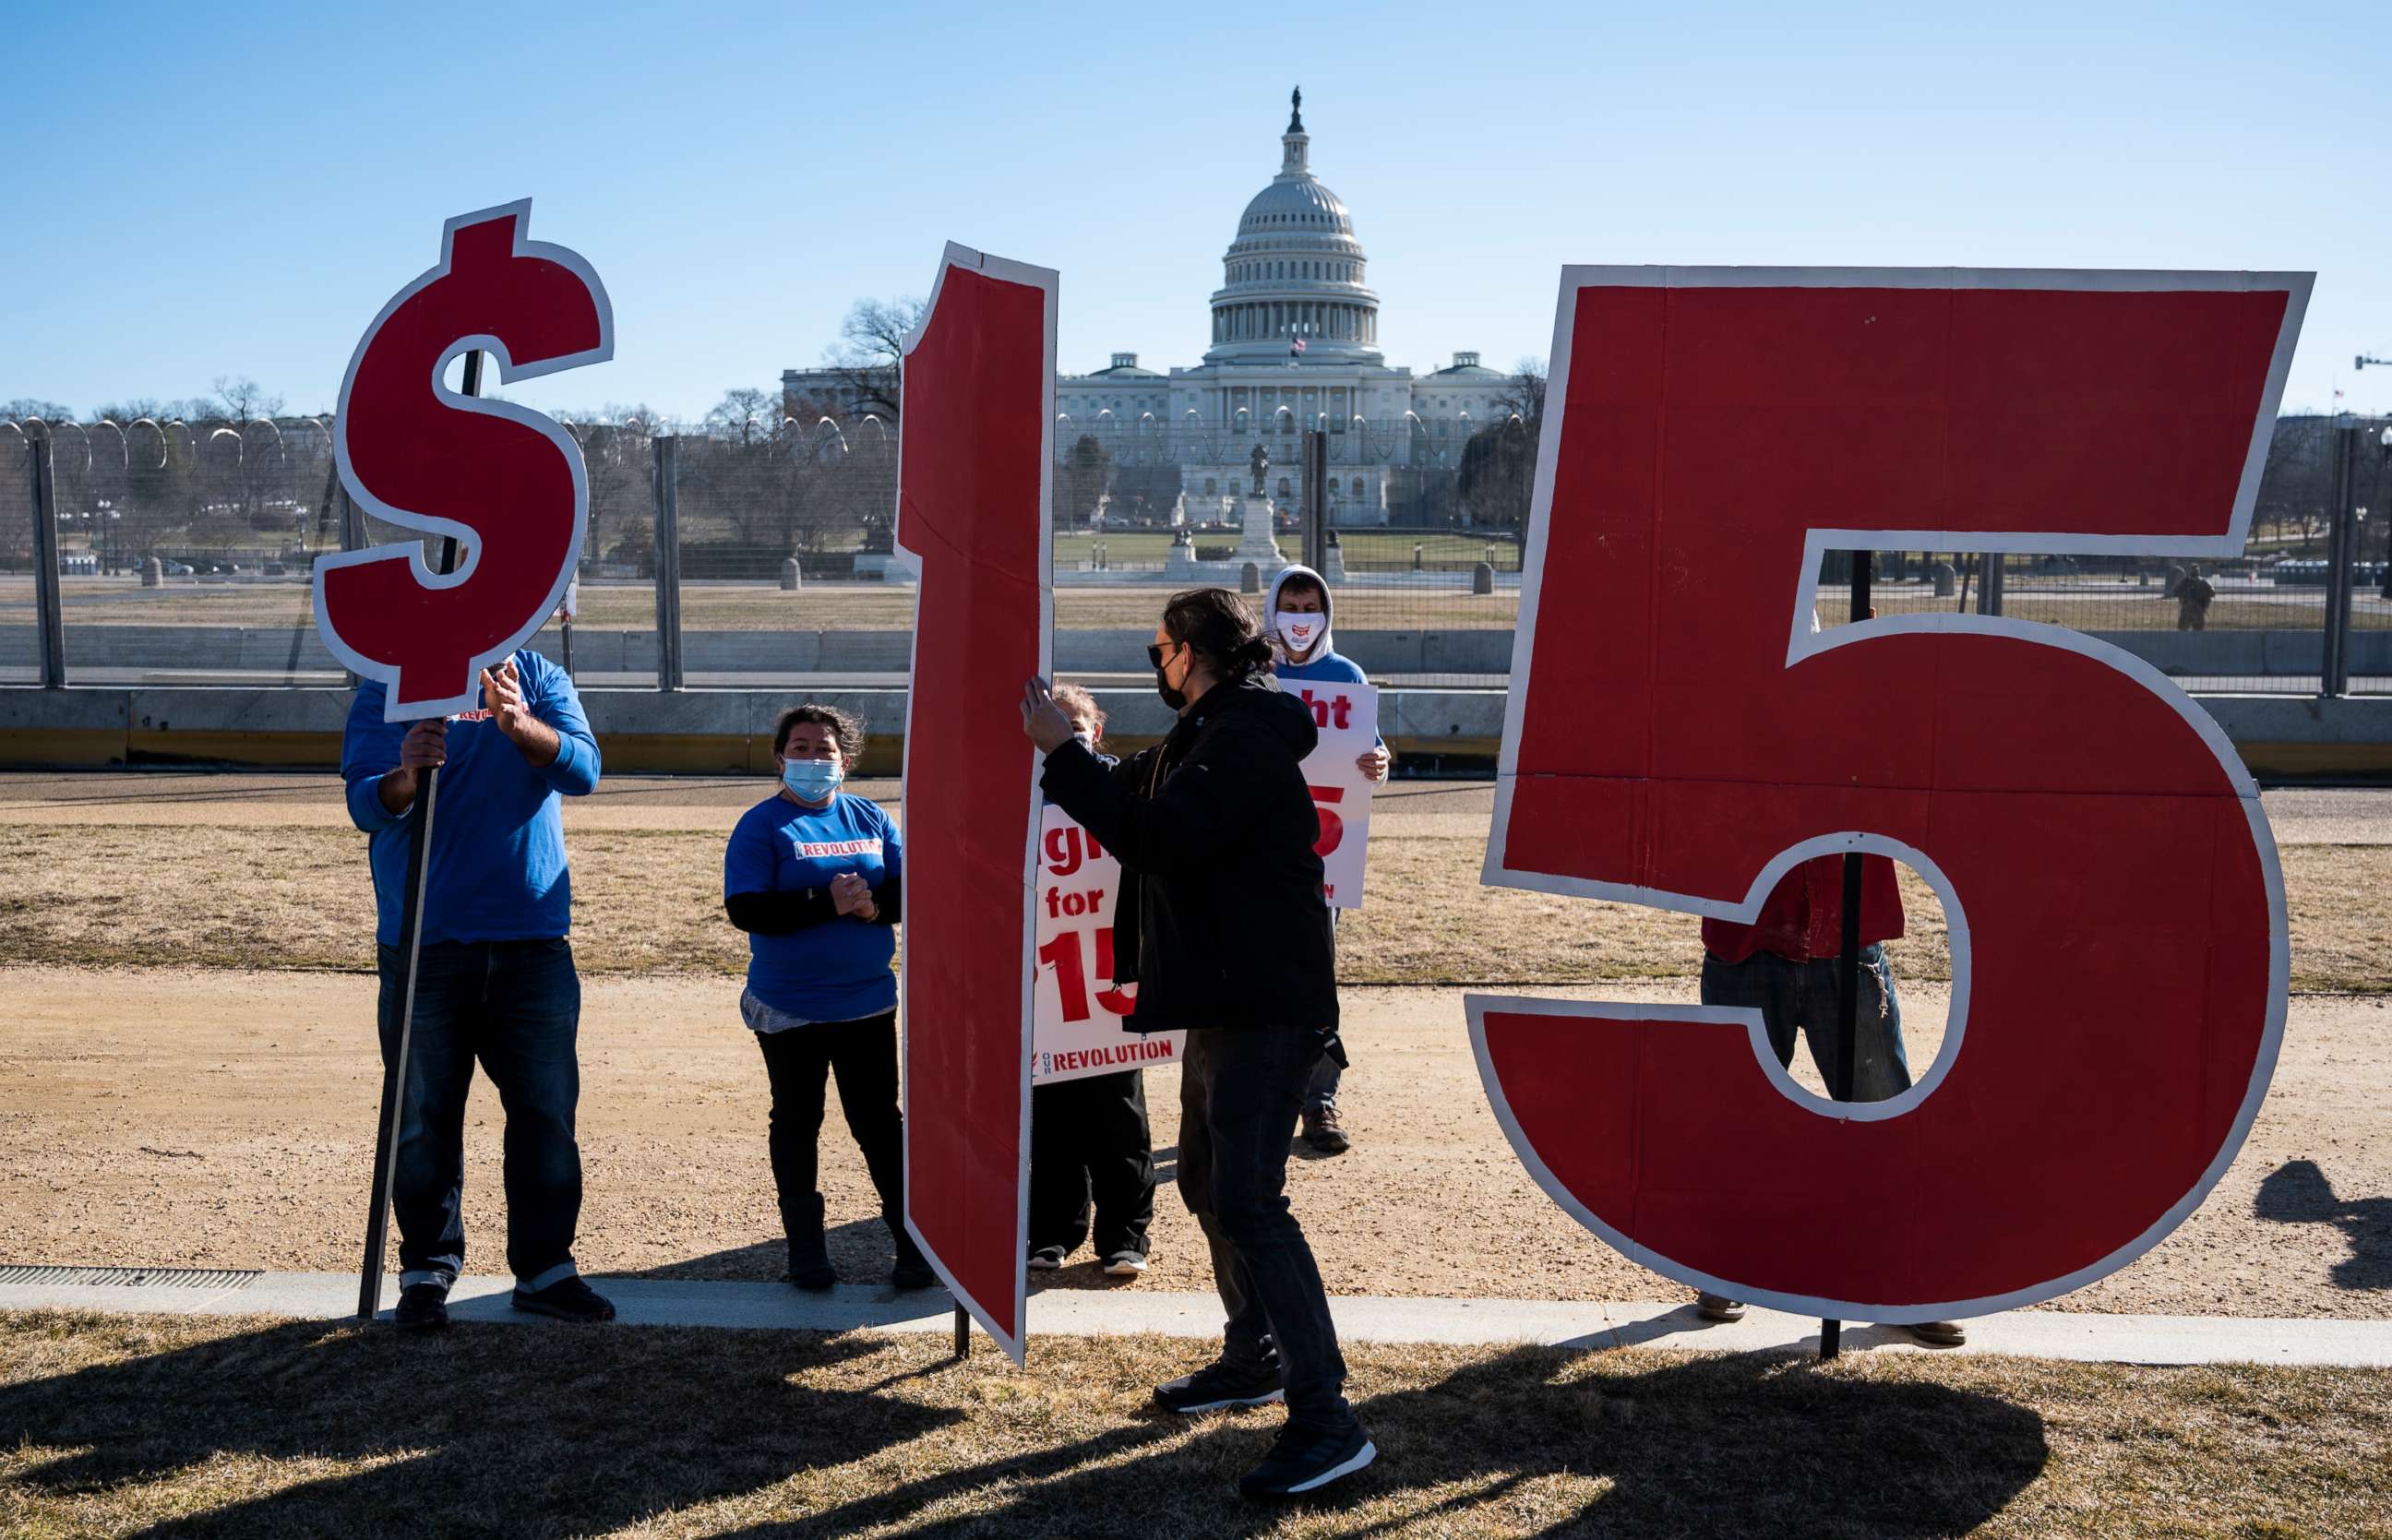 PHOTO: Activists hold signs outside the Capitol complex in Washington on Feb. 25, 2021, to call on Congress to pass the $15 federal minimum wage hike proposed as part of the COVID relief bill.